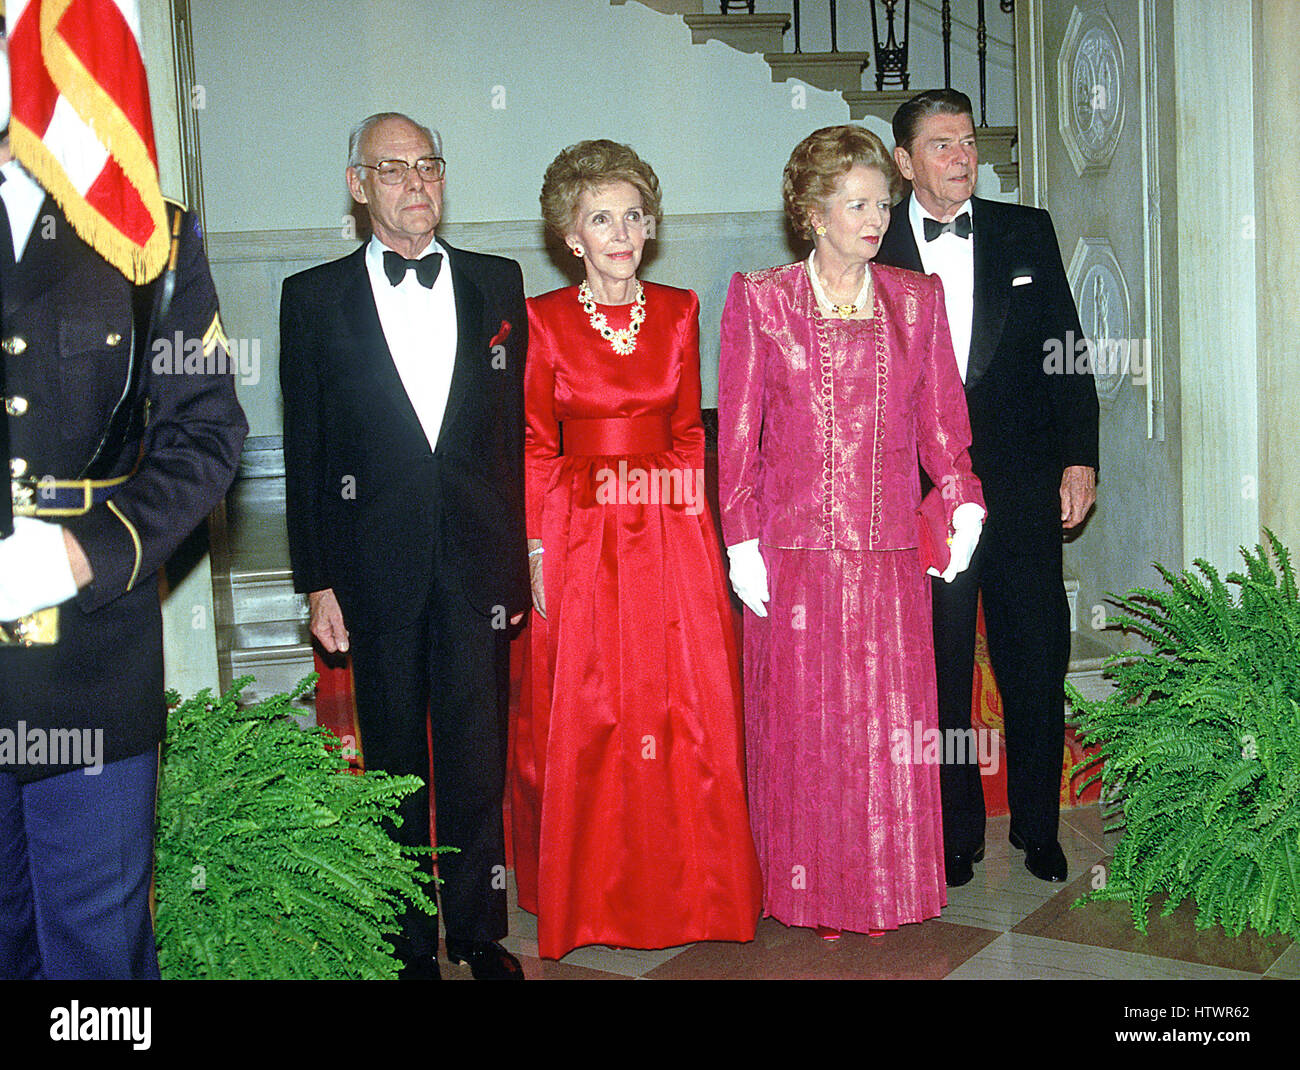 Denis Thatcher, first lady Nancy Reagan, Prime Minister Margaret Thatcher of Great Britain, and United States President Ronald Reagan pose for the 'Grand Staircase' photo at the White House in Washington, D.C prior the dinner in the Prime Minister's honor Stock Photo